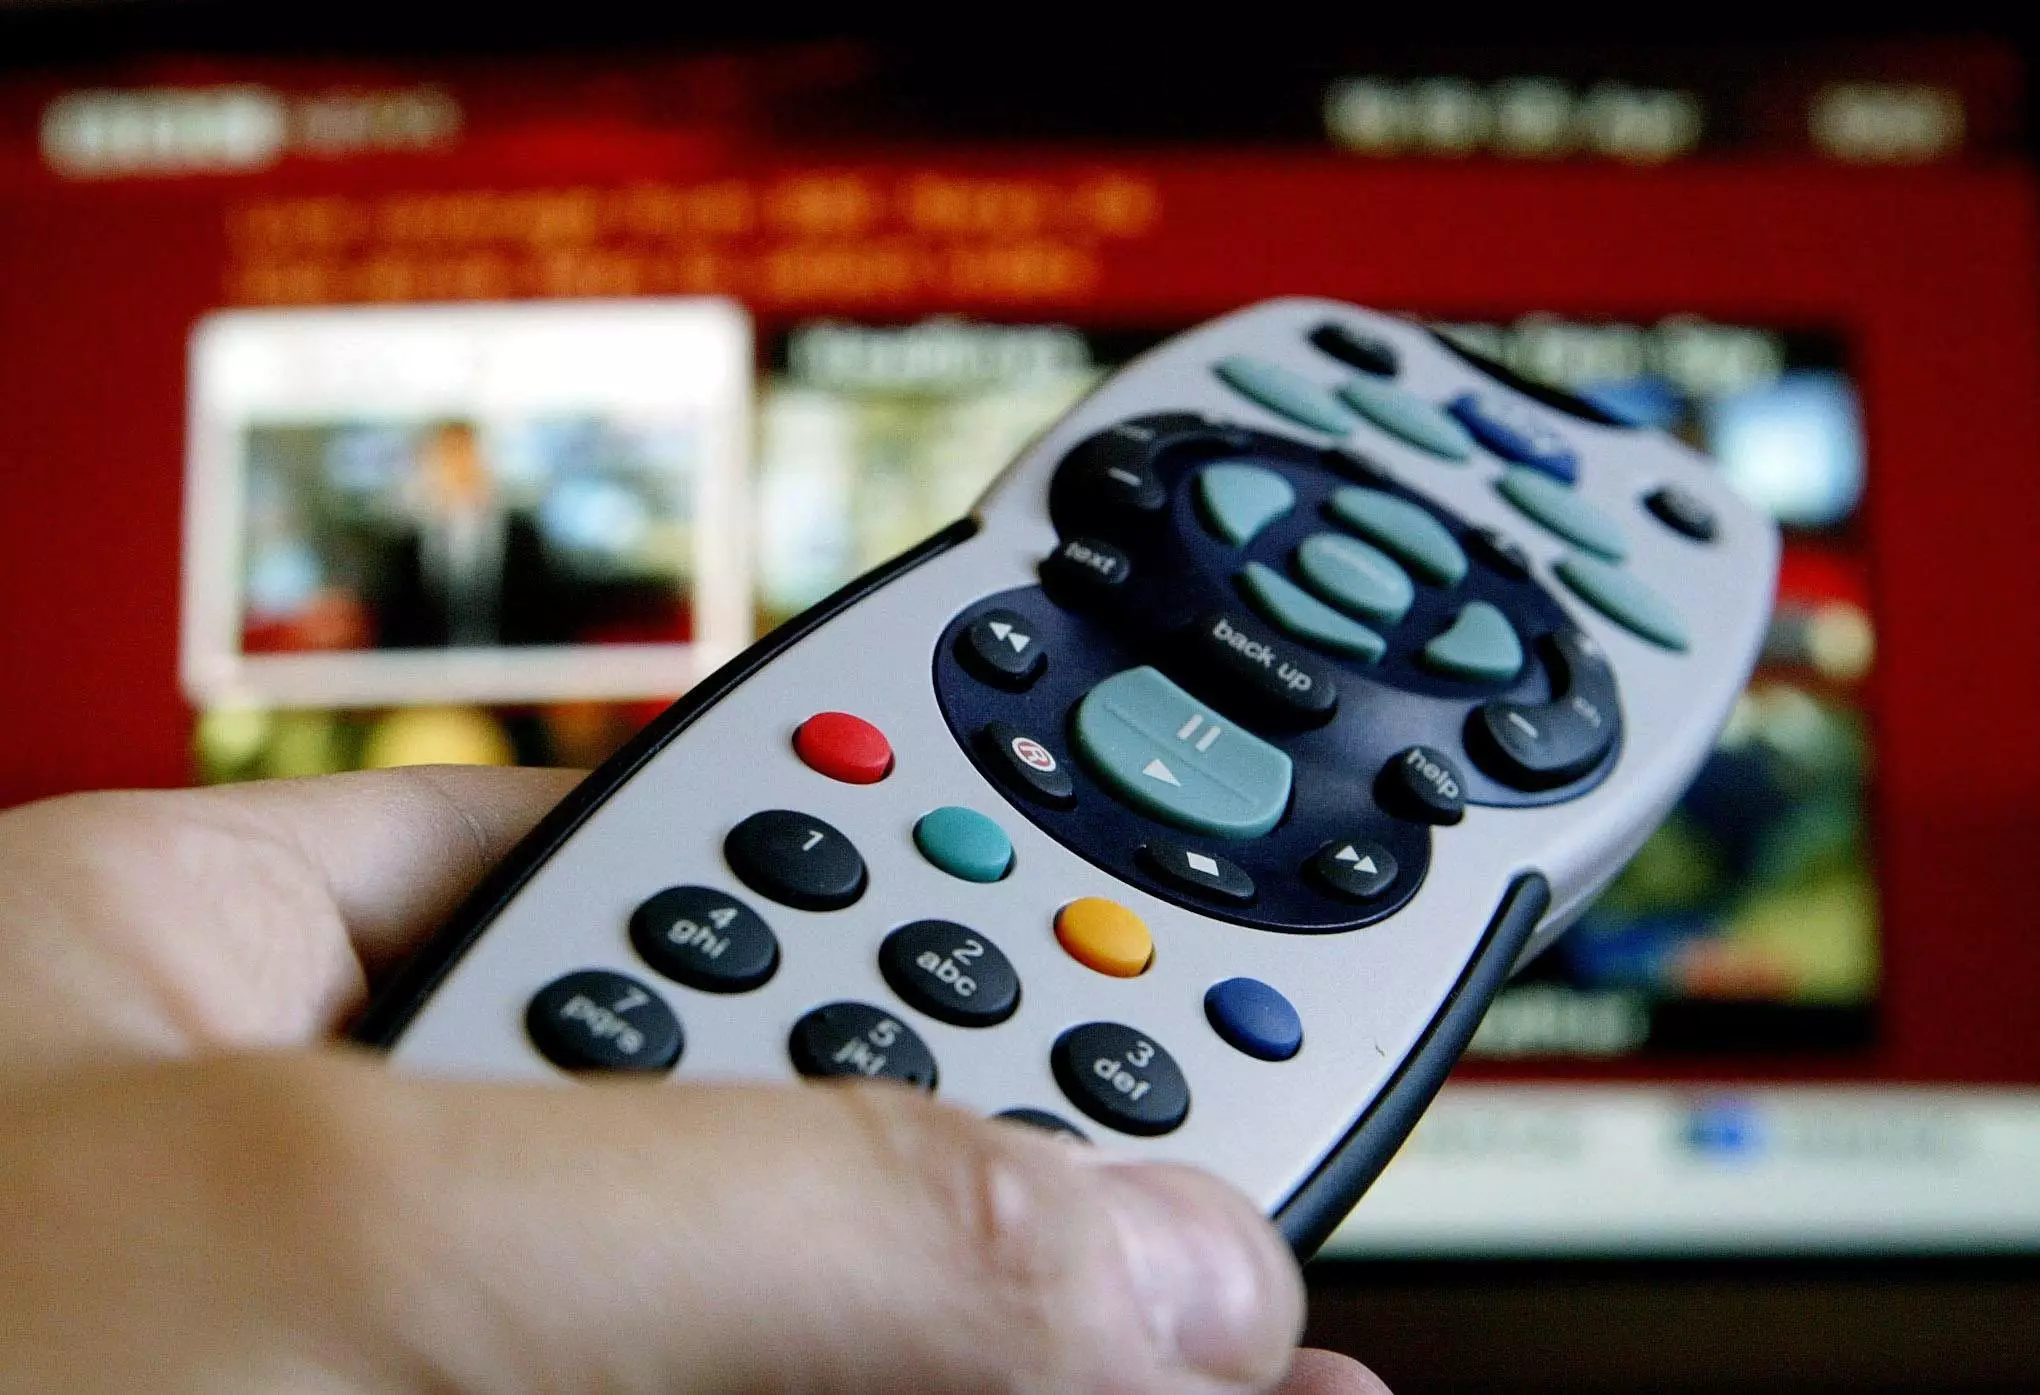 Sky customers could see their yearly TV and broadband bill rise by £72.